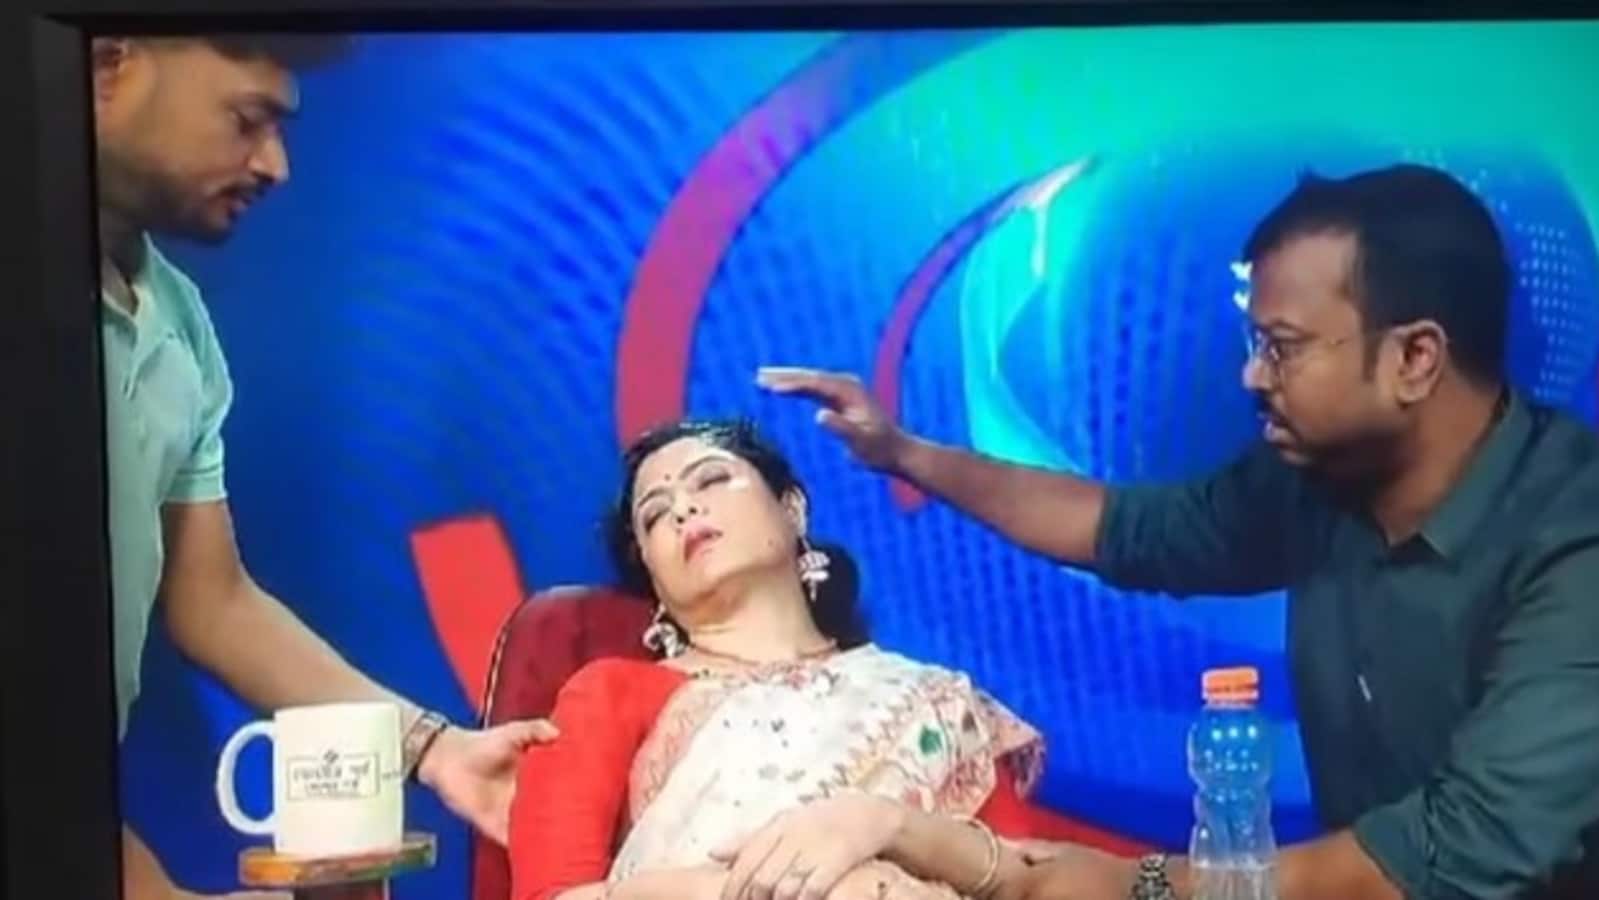 Doordarshan anchor faints during live news reading: 'I could no longer see, blacked out'